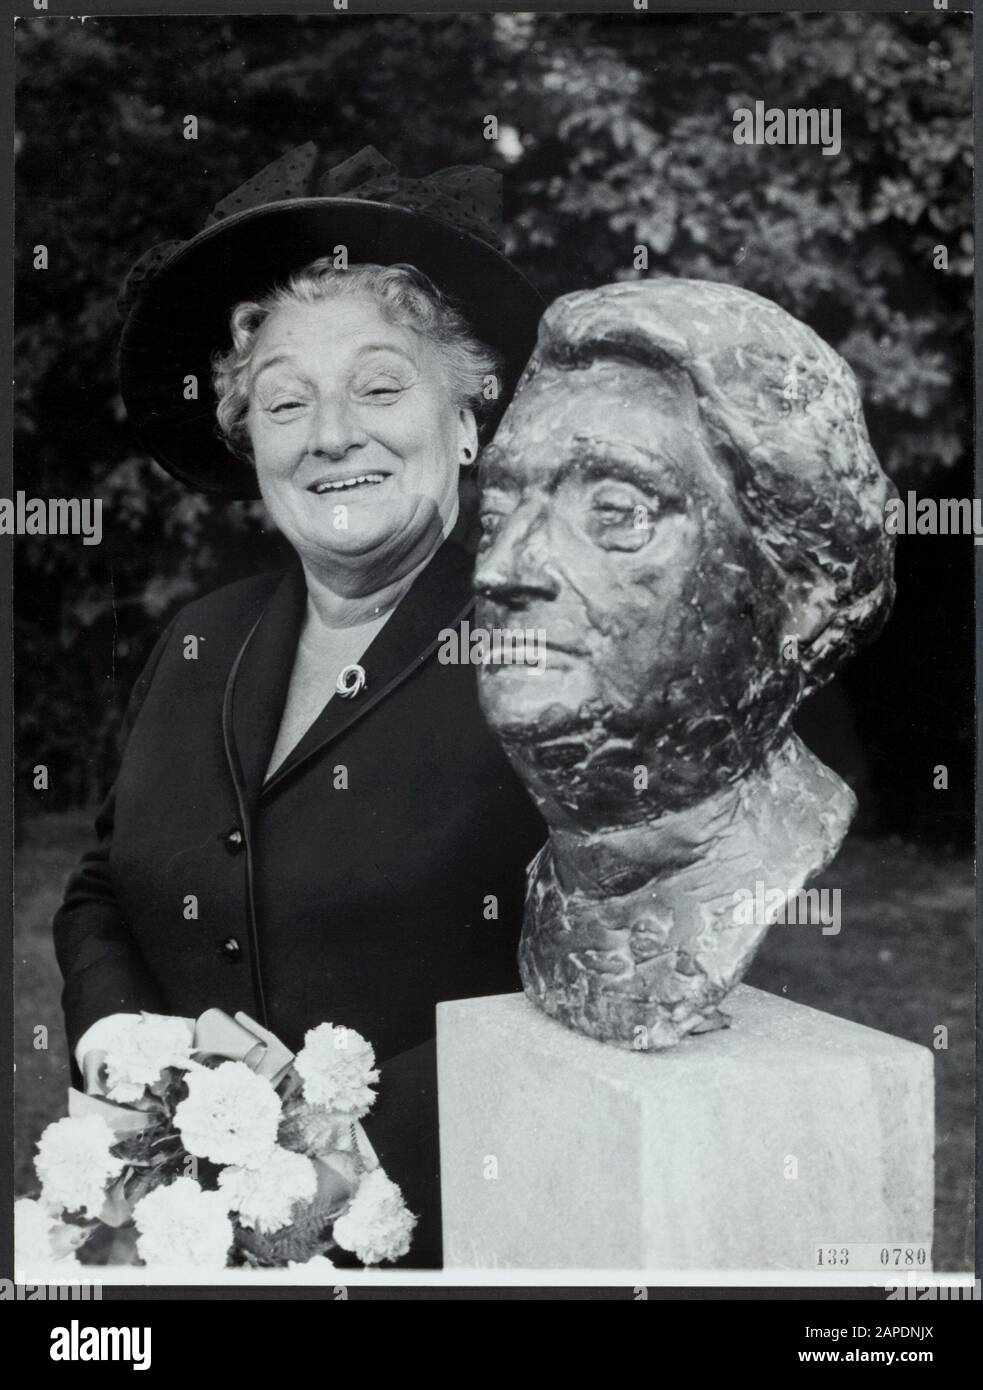 Amsterdam. Beatrixoord in the Oosterpark: Mrs. Truus Weismuller-Meijer next to her bronze image during the unveiling of it in 1965 Annotation: Statue of the hand of Herman Janzen (1923-1986) Date: undated Location: Amsterdam, Noord-Holland Keywords: persecution of Jews, sculptures, assistance, resistance Personal name: Wijsmuller-Meijer, Gertruida Stock Photo